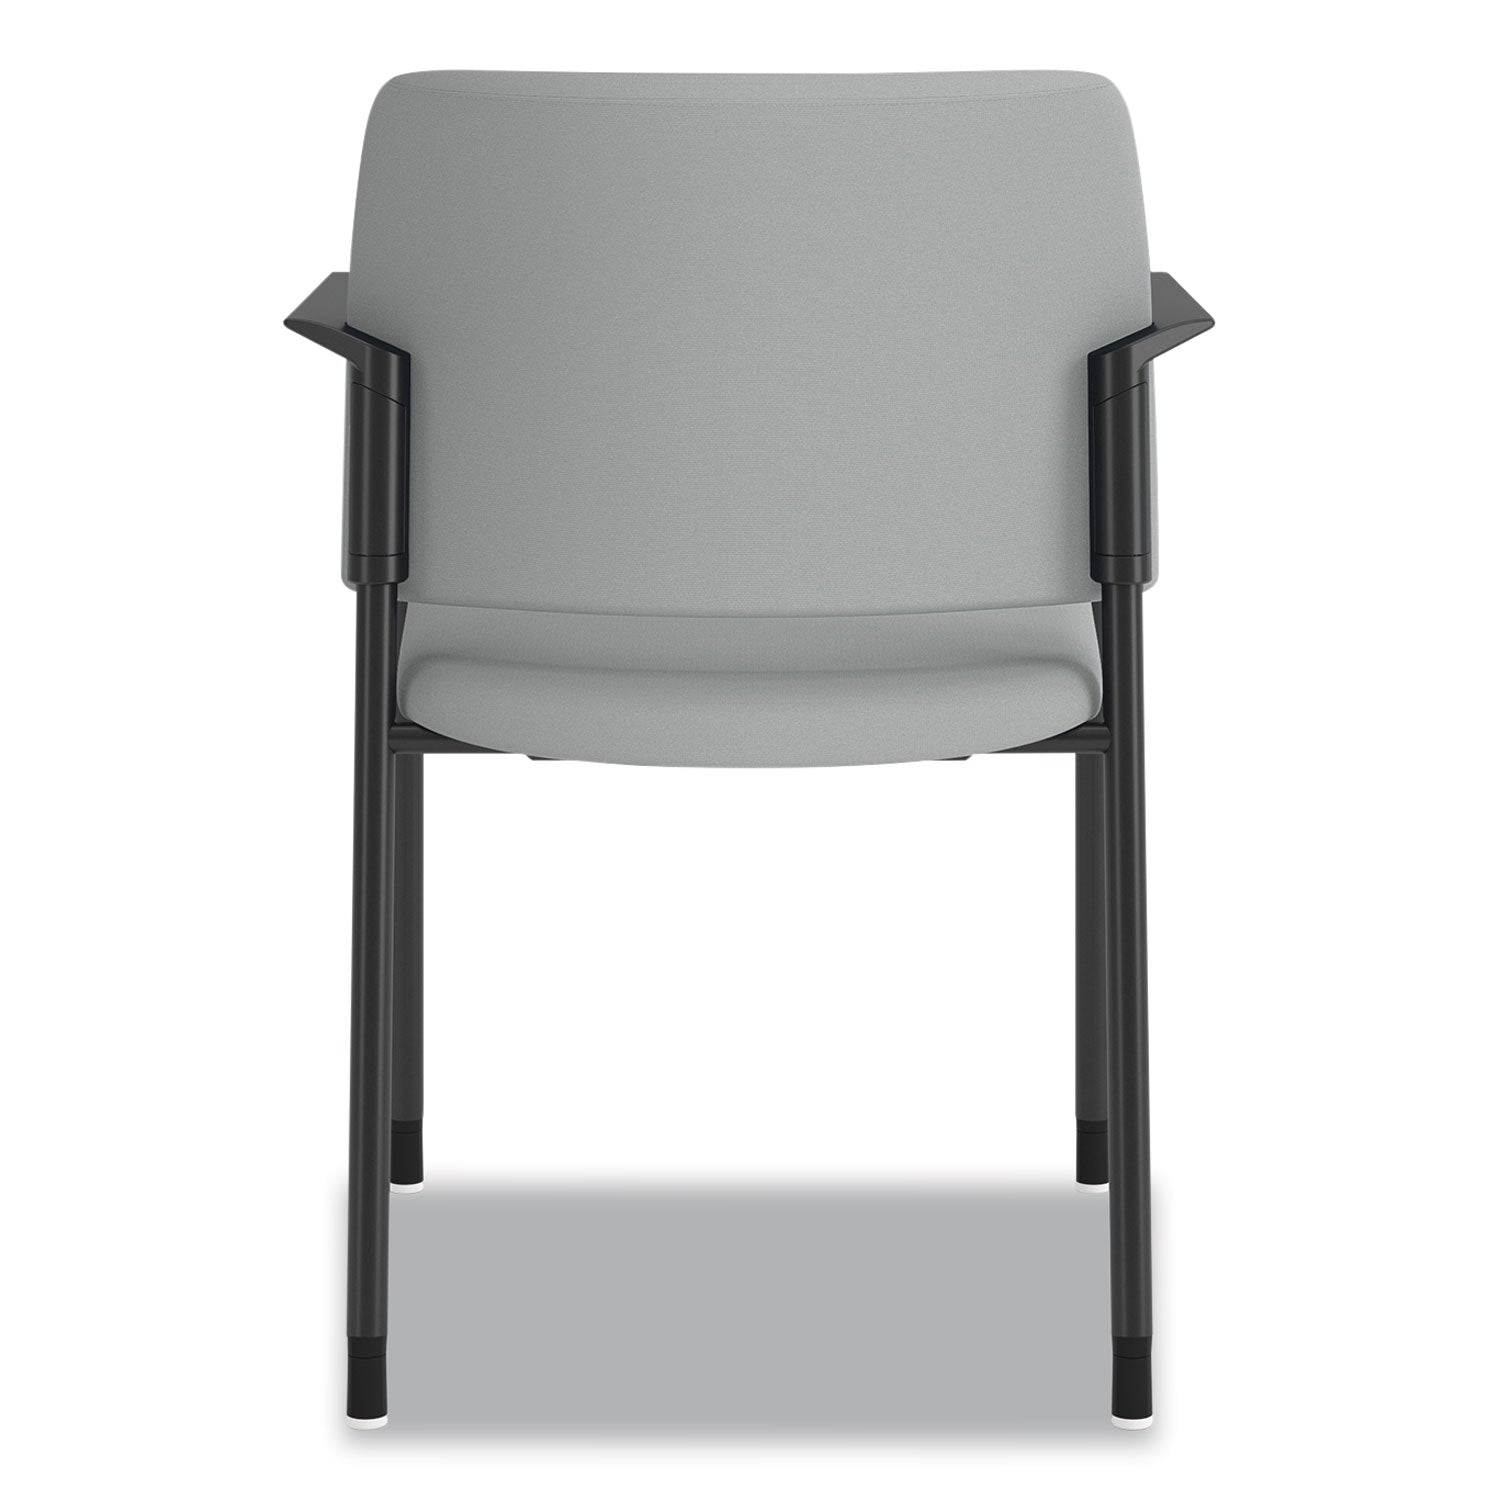 accommodate-series-guest-chair-with-arms-vinyl-upholstery-235-x-2225-x-32-flint-seat-back-charblack-legs-2-carton_honsgs6fbsx39cb - 4